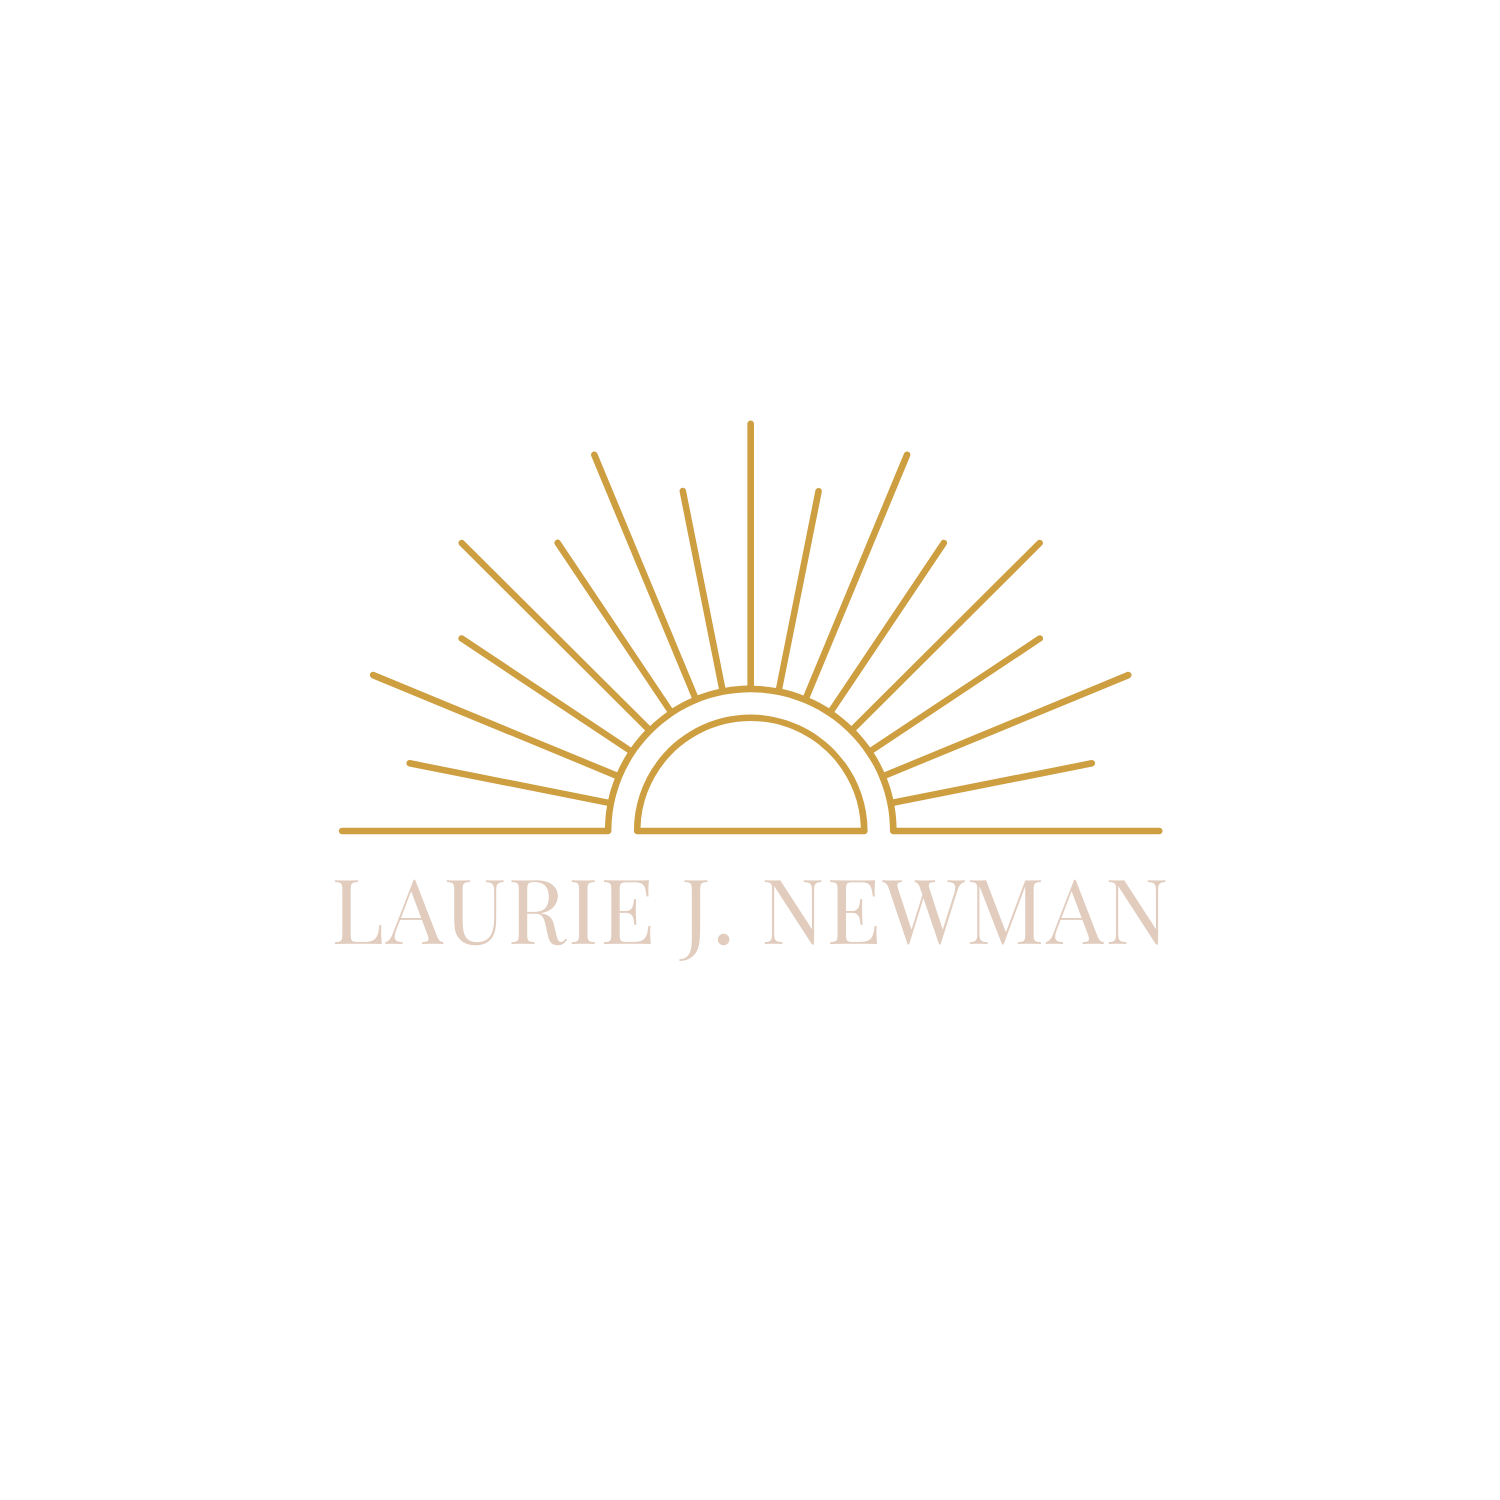 Laurie J. Newman